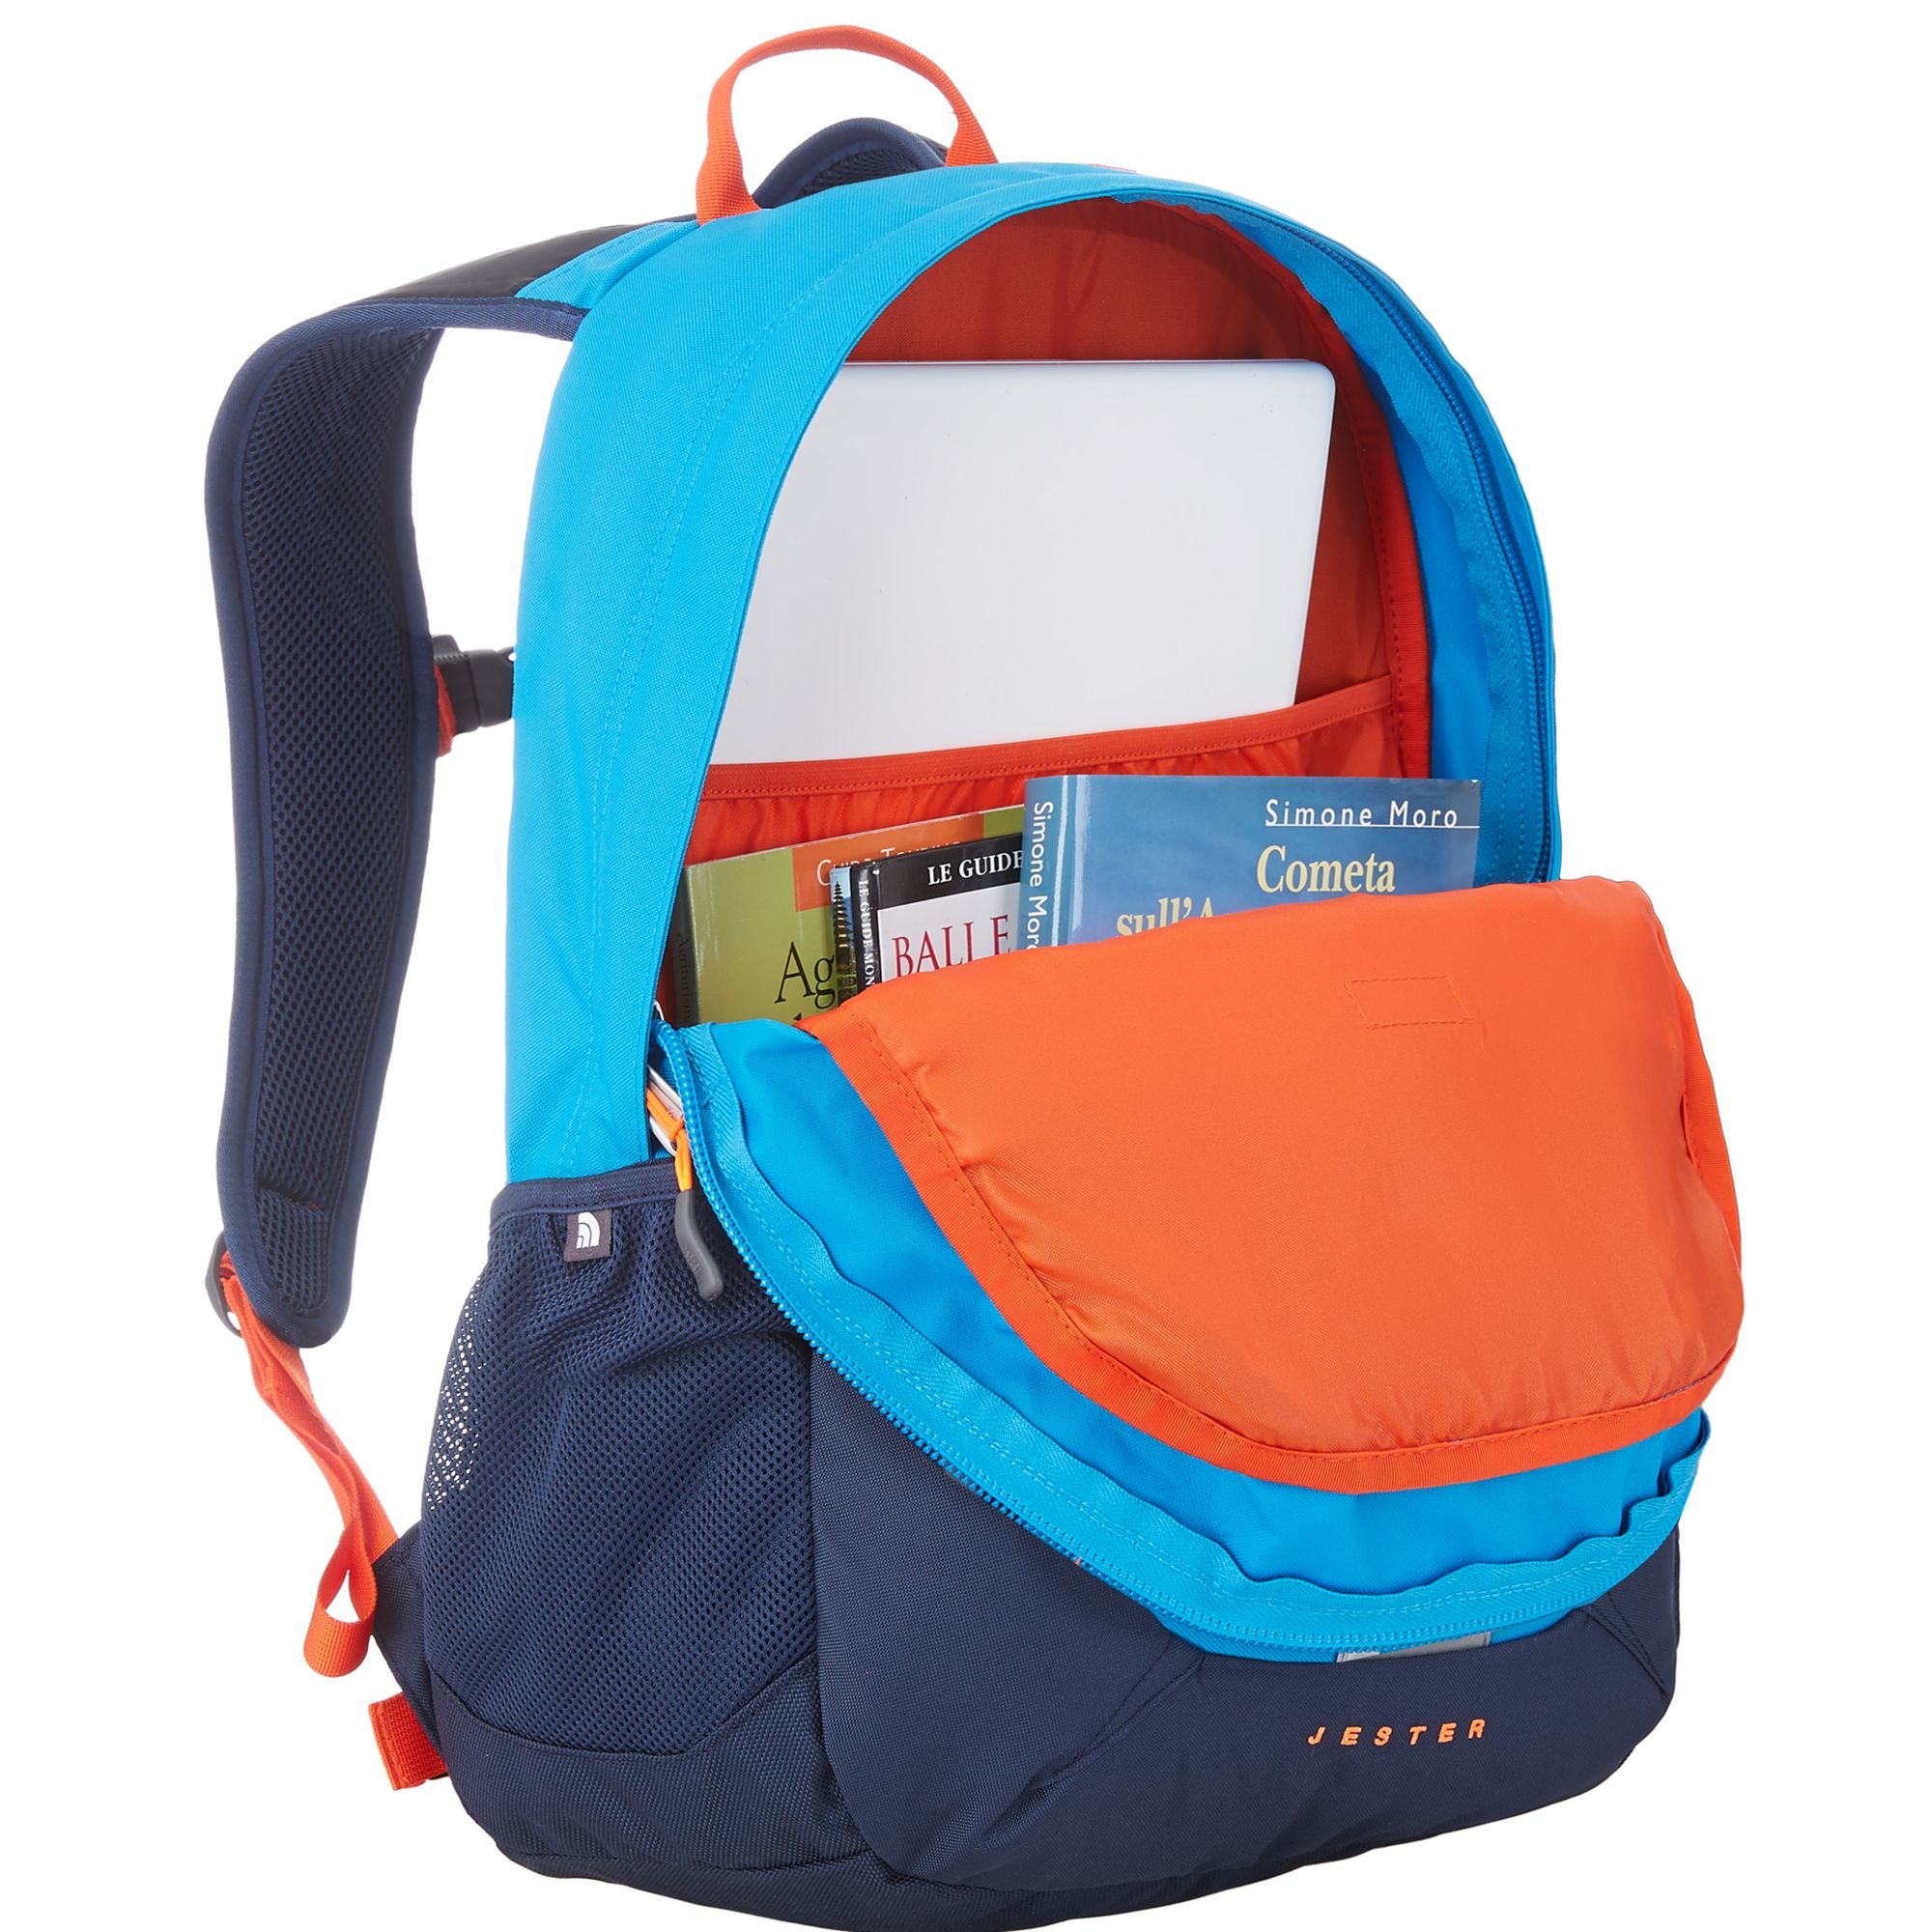 blue and orange north face backpack